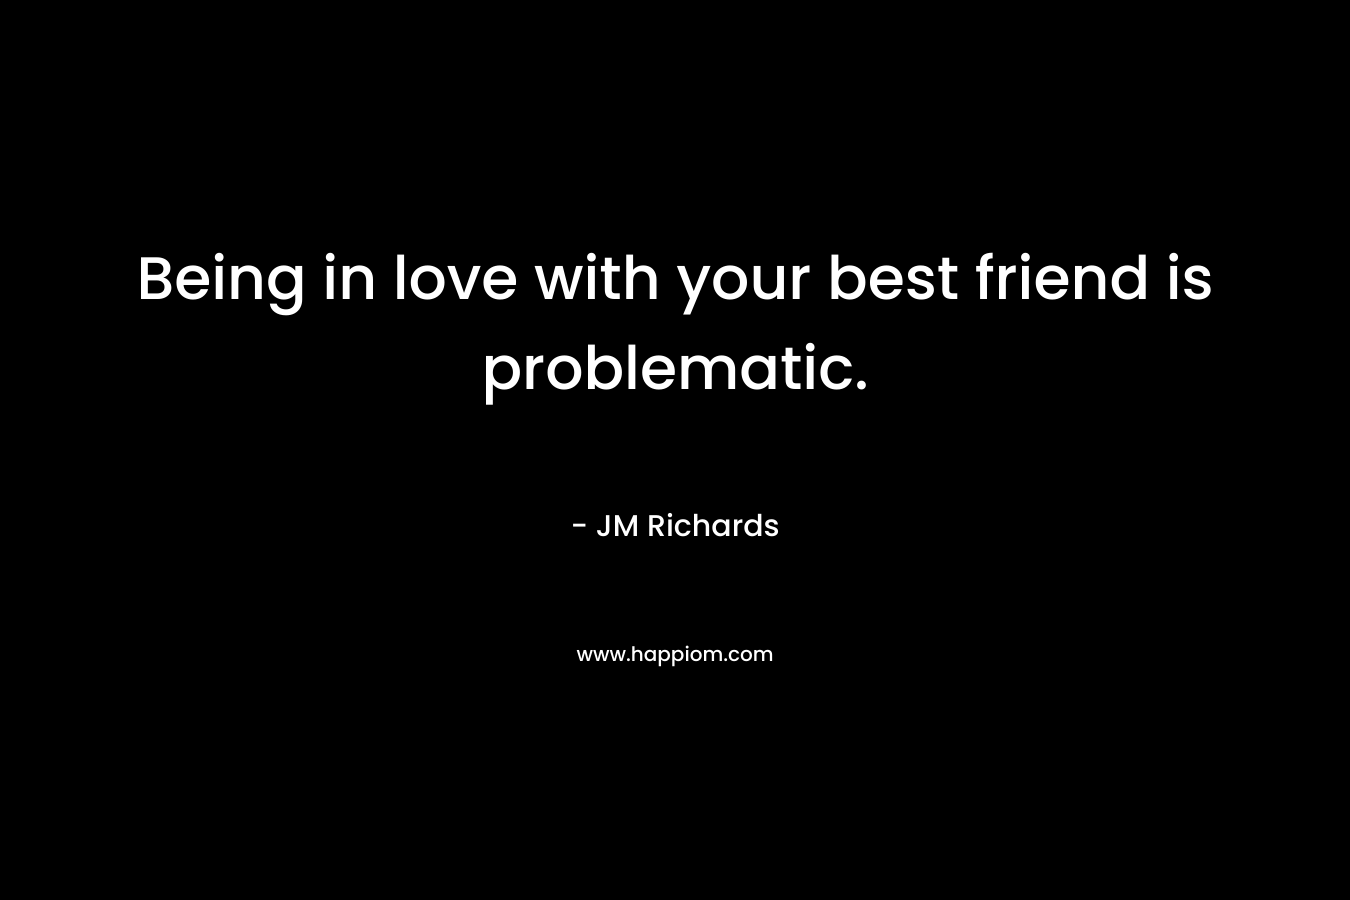 Being in love with your best friend is problematic.